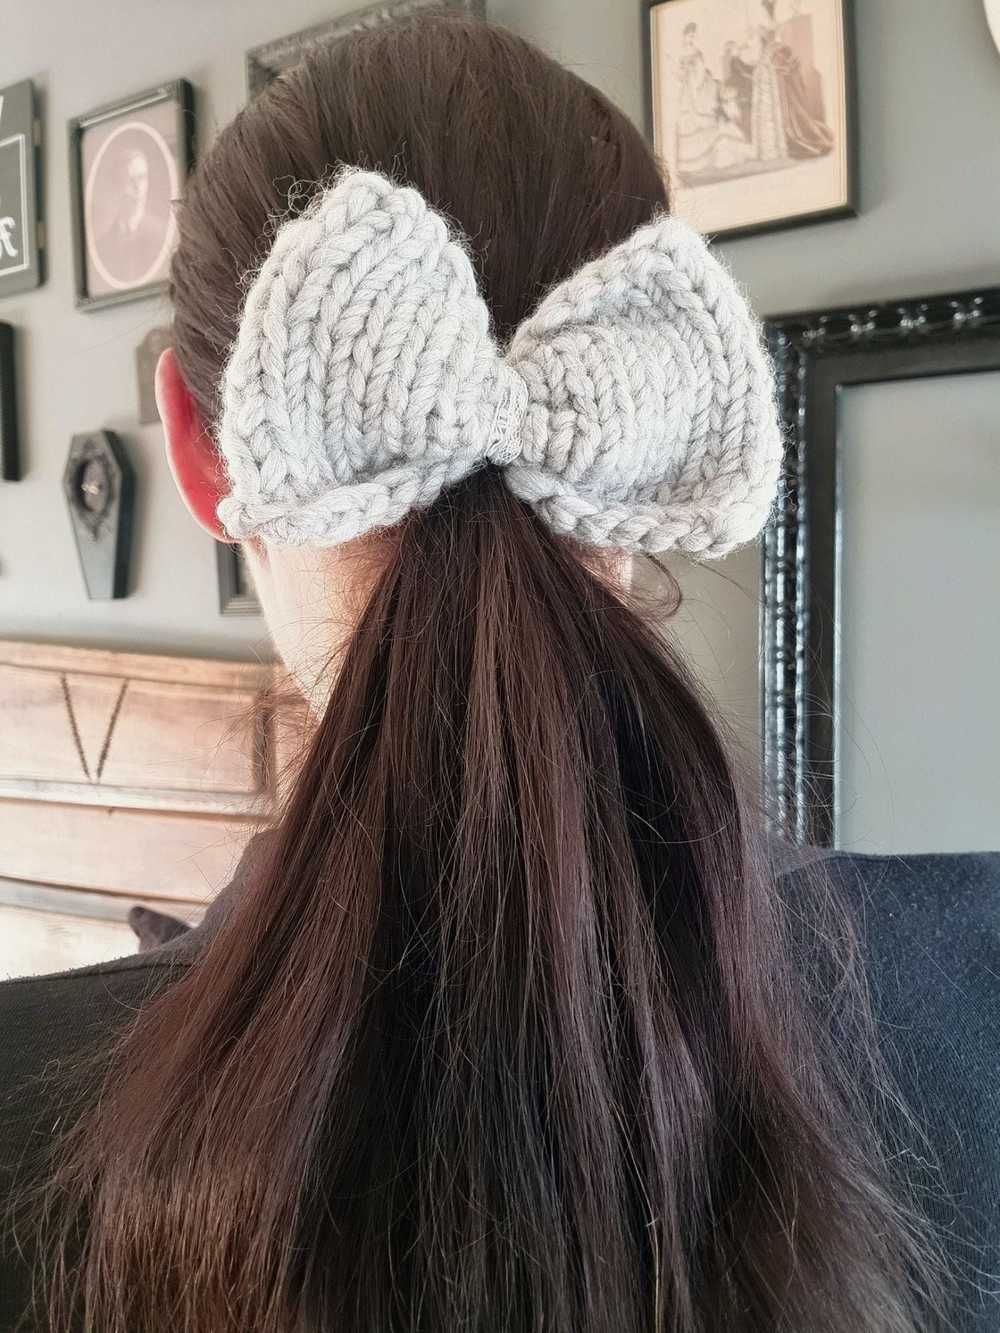 The "Ice Queen" Hand Knit Hair Bow - image 4